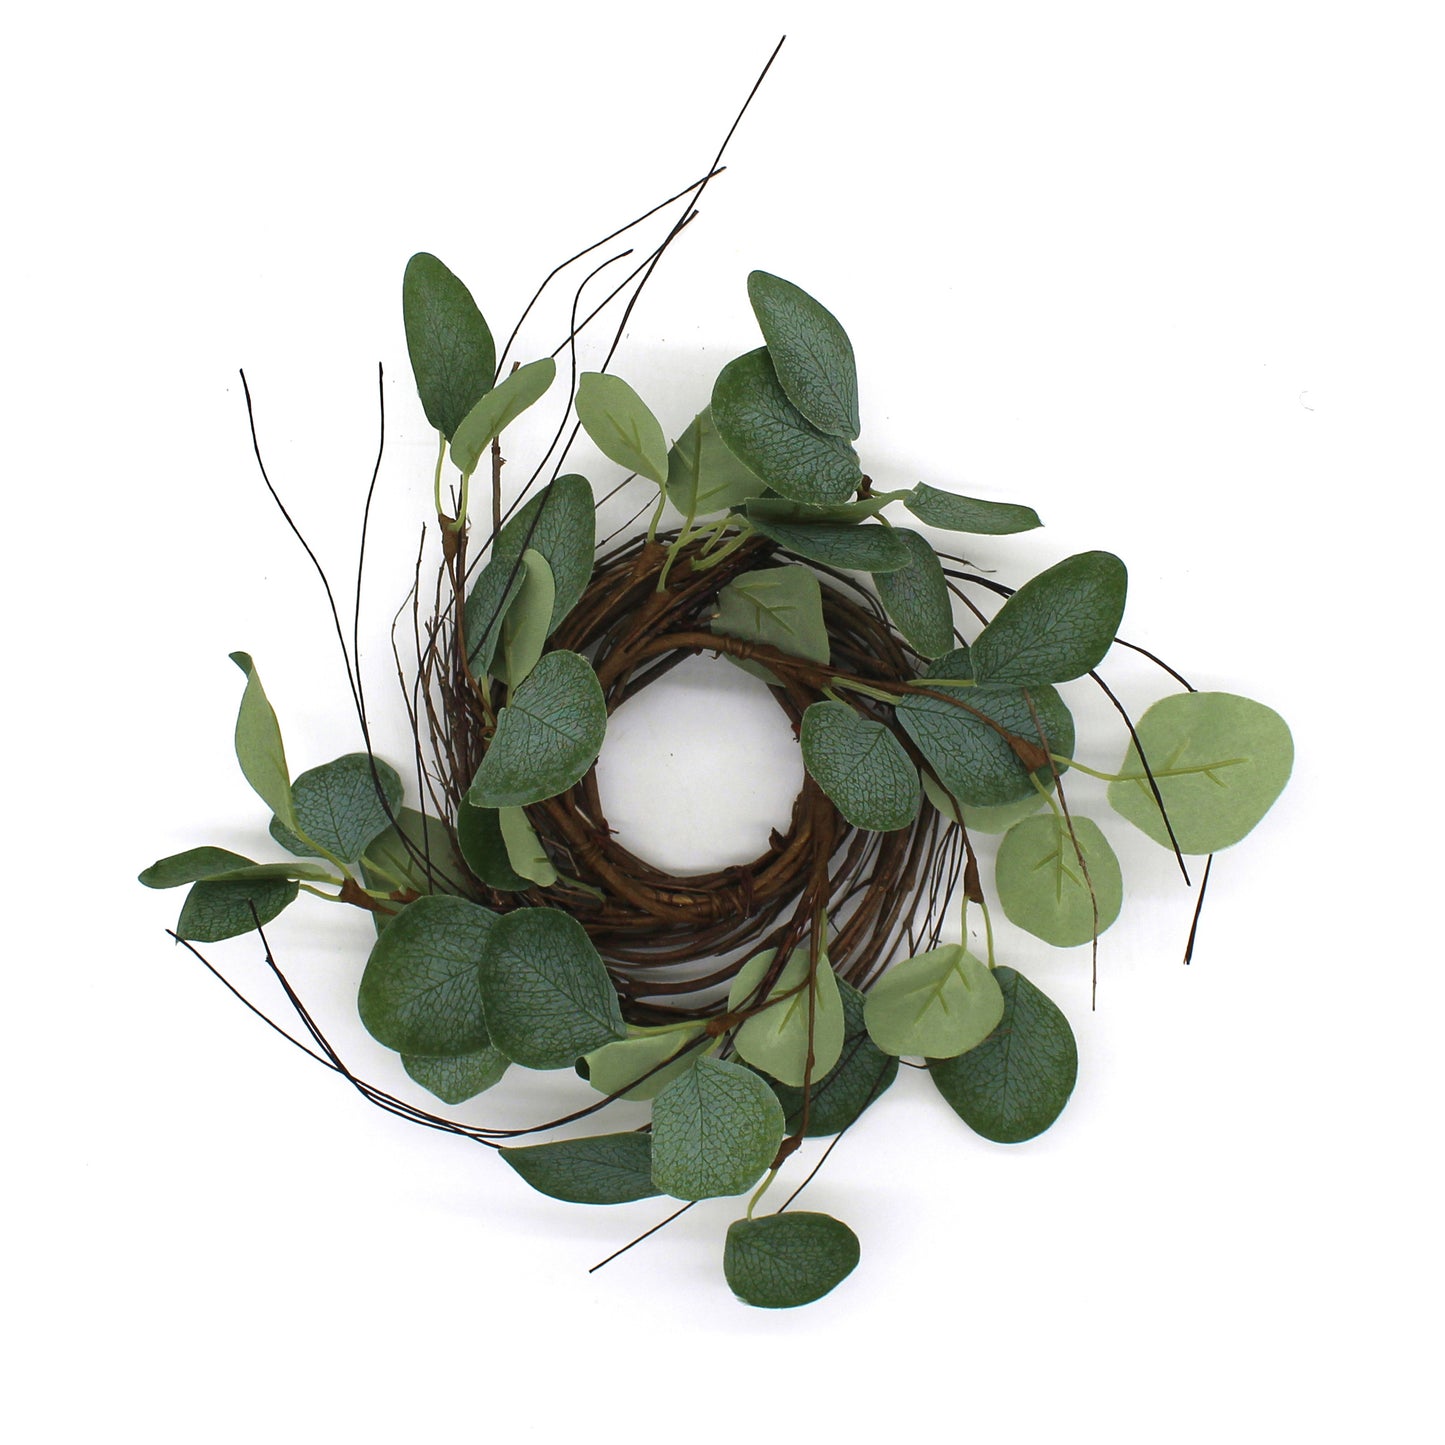 CVHOMEDECO. Rustic Country Artificial Eucalyptus Leaves and Twig Wreath, Year Round Full Green Wreath for Indoor or Outdoor Display, 9 Inch